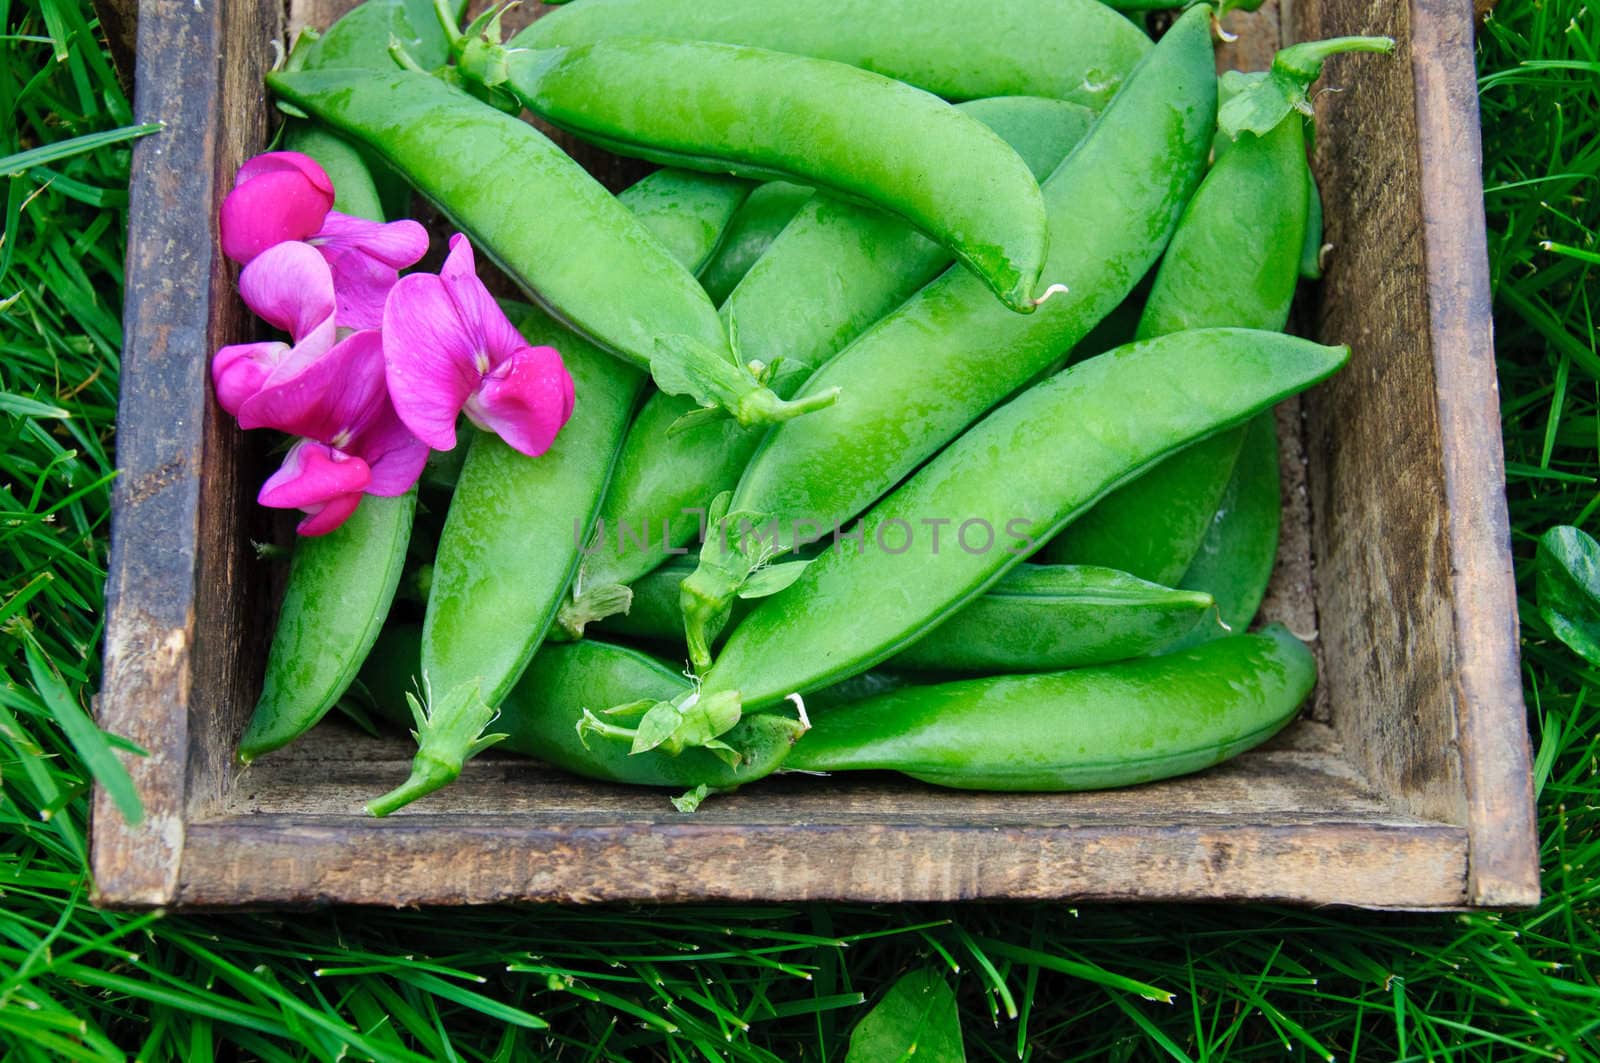 Peas pod and flower on a wooden tray placed on grass